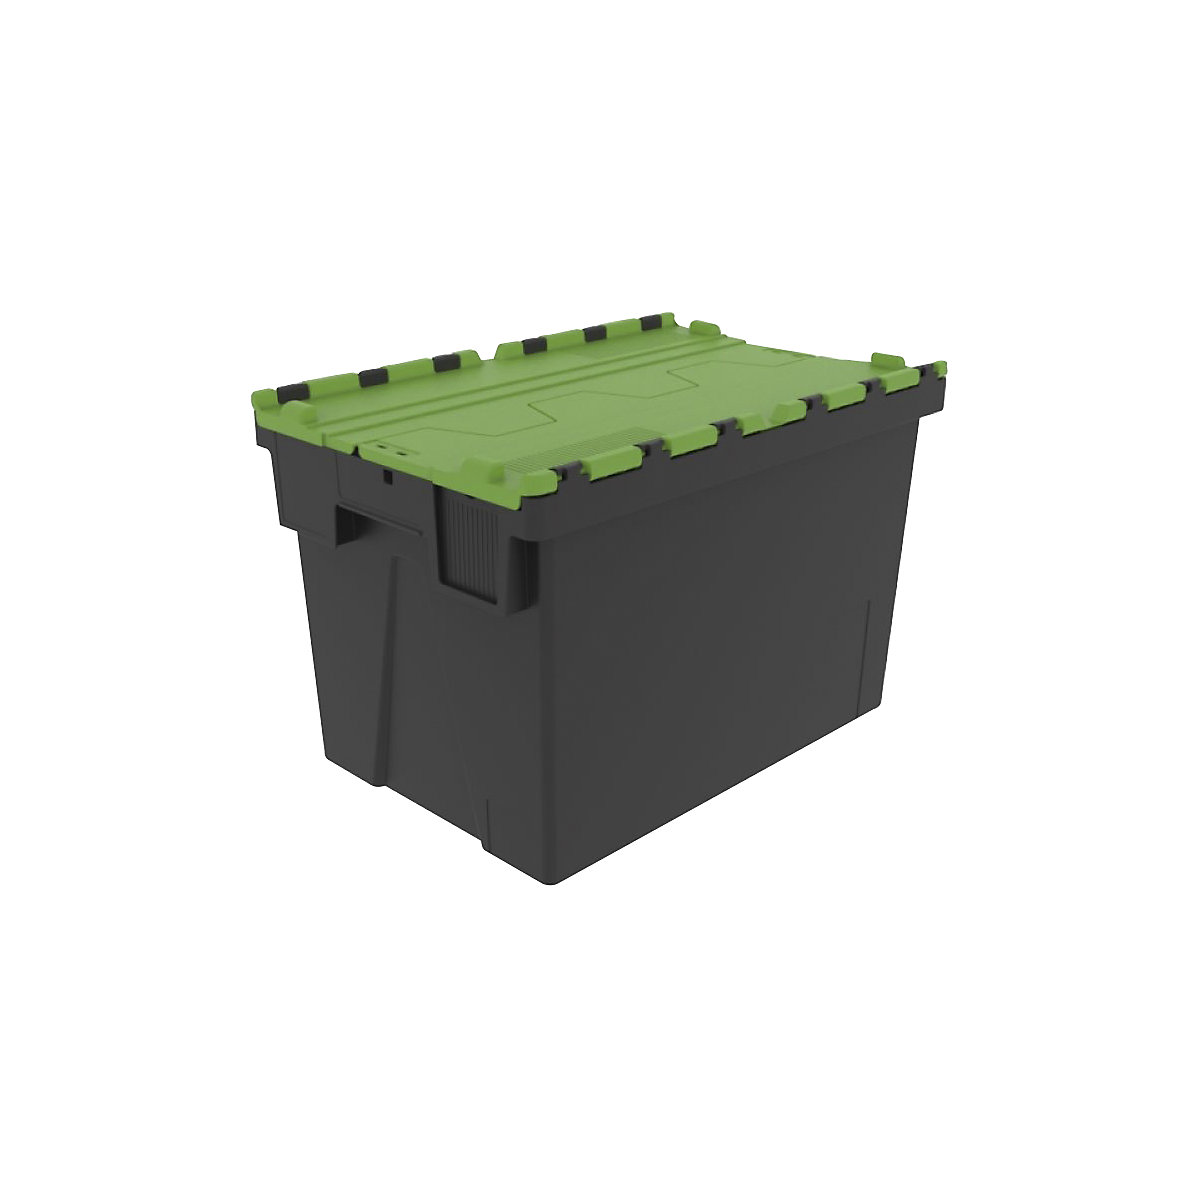 Reusable stacking container, LxWxH 600 x 400 x 400 mm, black/green-3